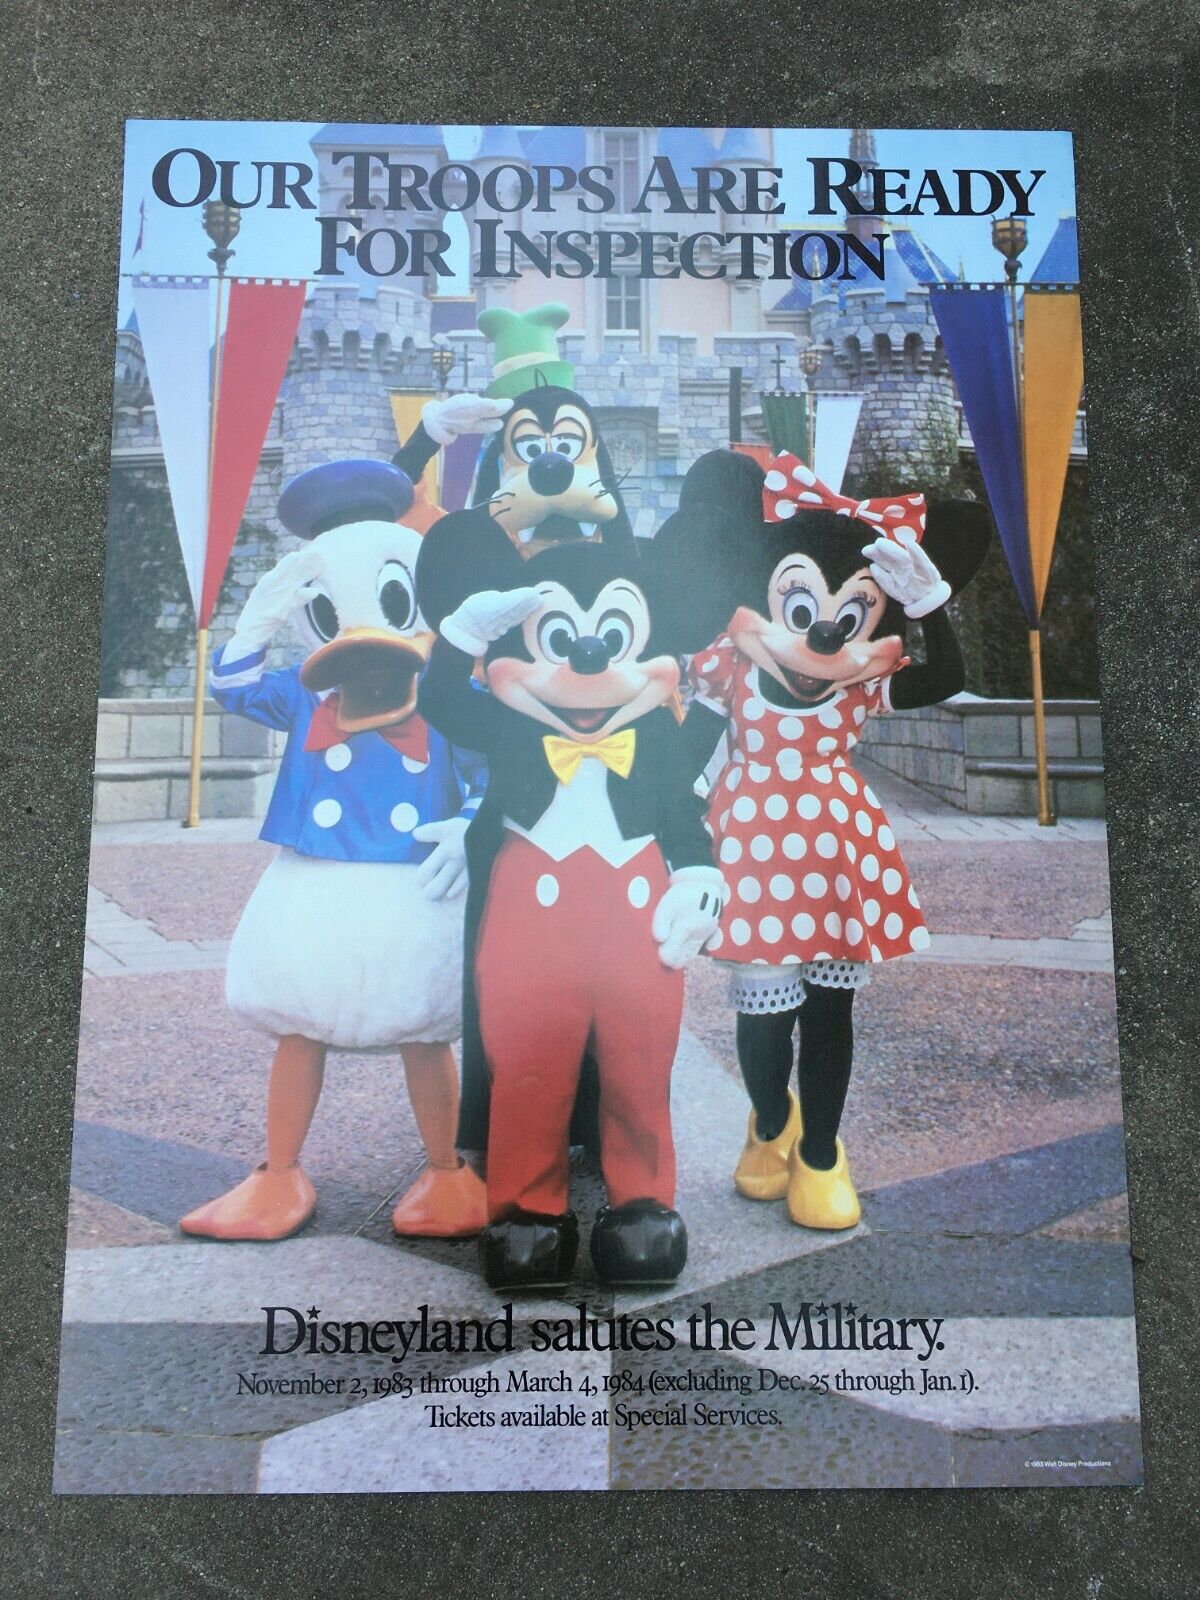 1984 Our Troops Are Ready For Inspection, Disneyland Salutes Our Military Poster